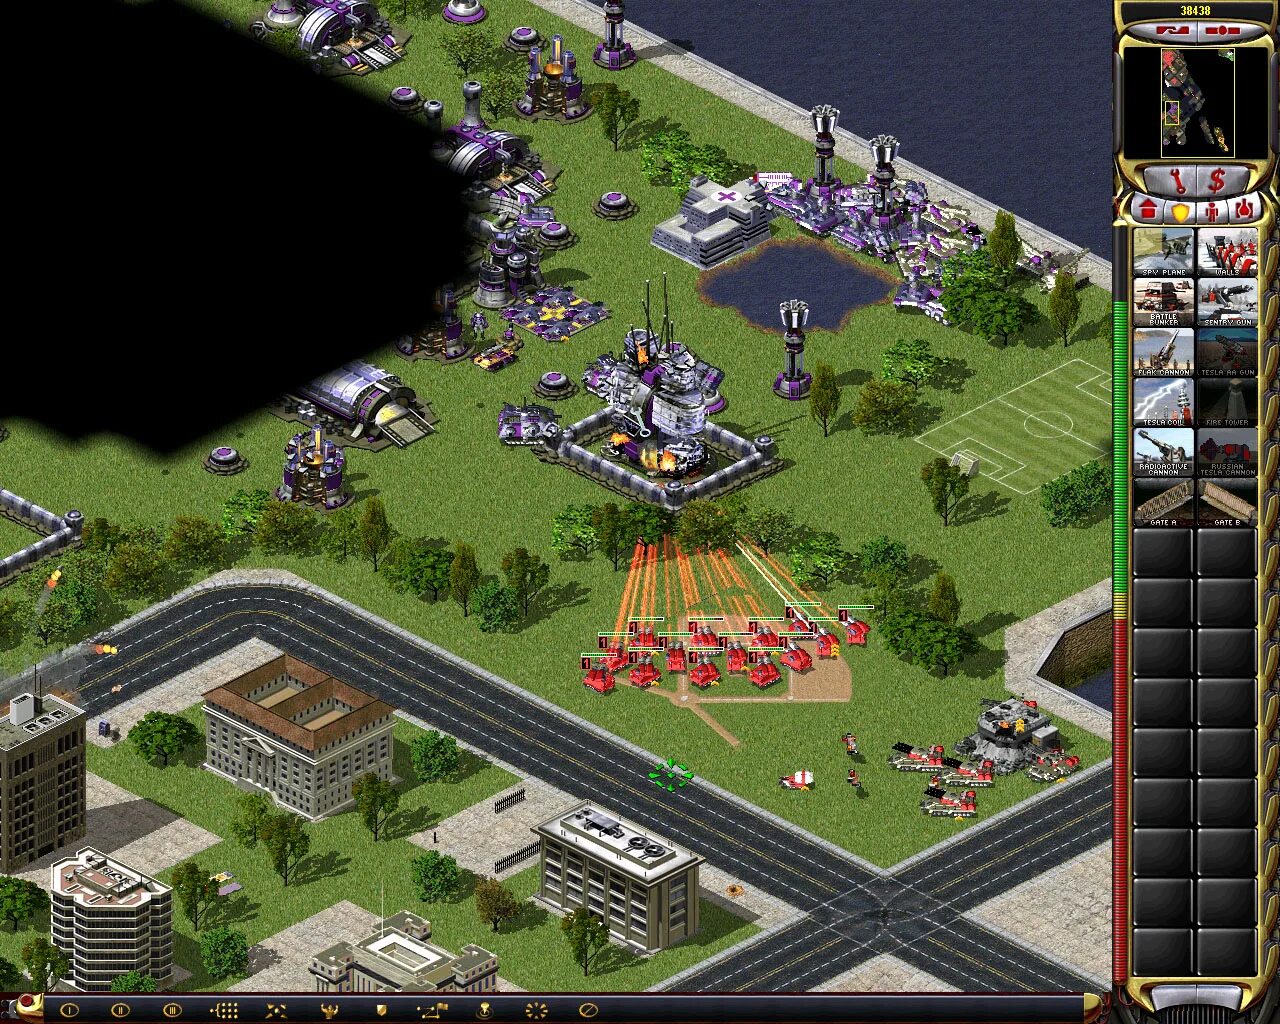 Red Alert 2. Command & Conquer: Red Alert 2. Command & Conquer: Red Alert 2 - Yuri's Revenge. Red Alert 2 Yuri's Revenge.